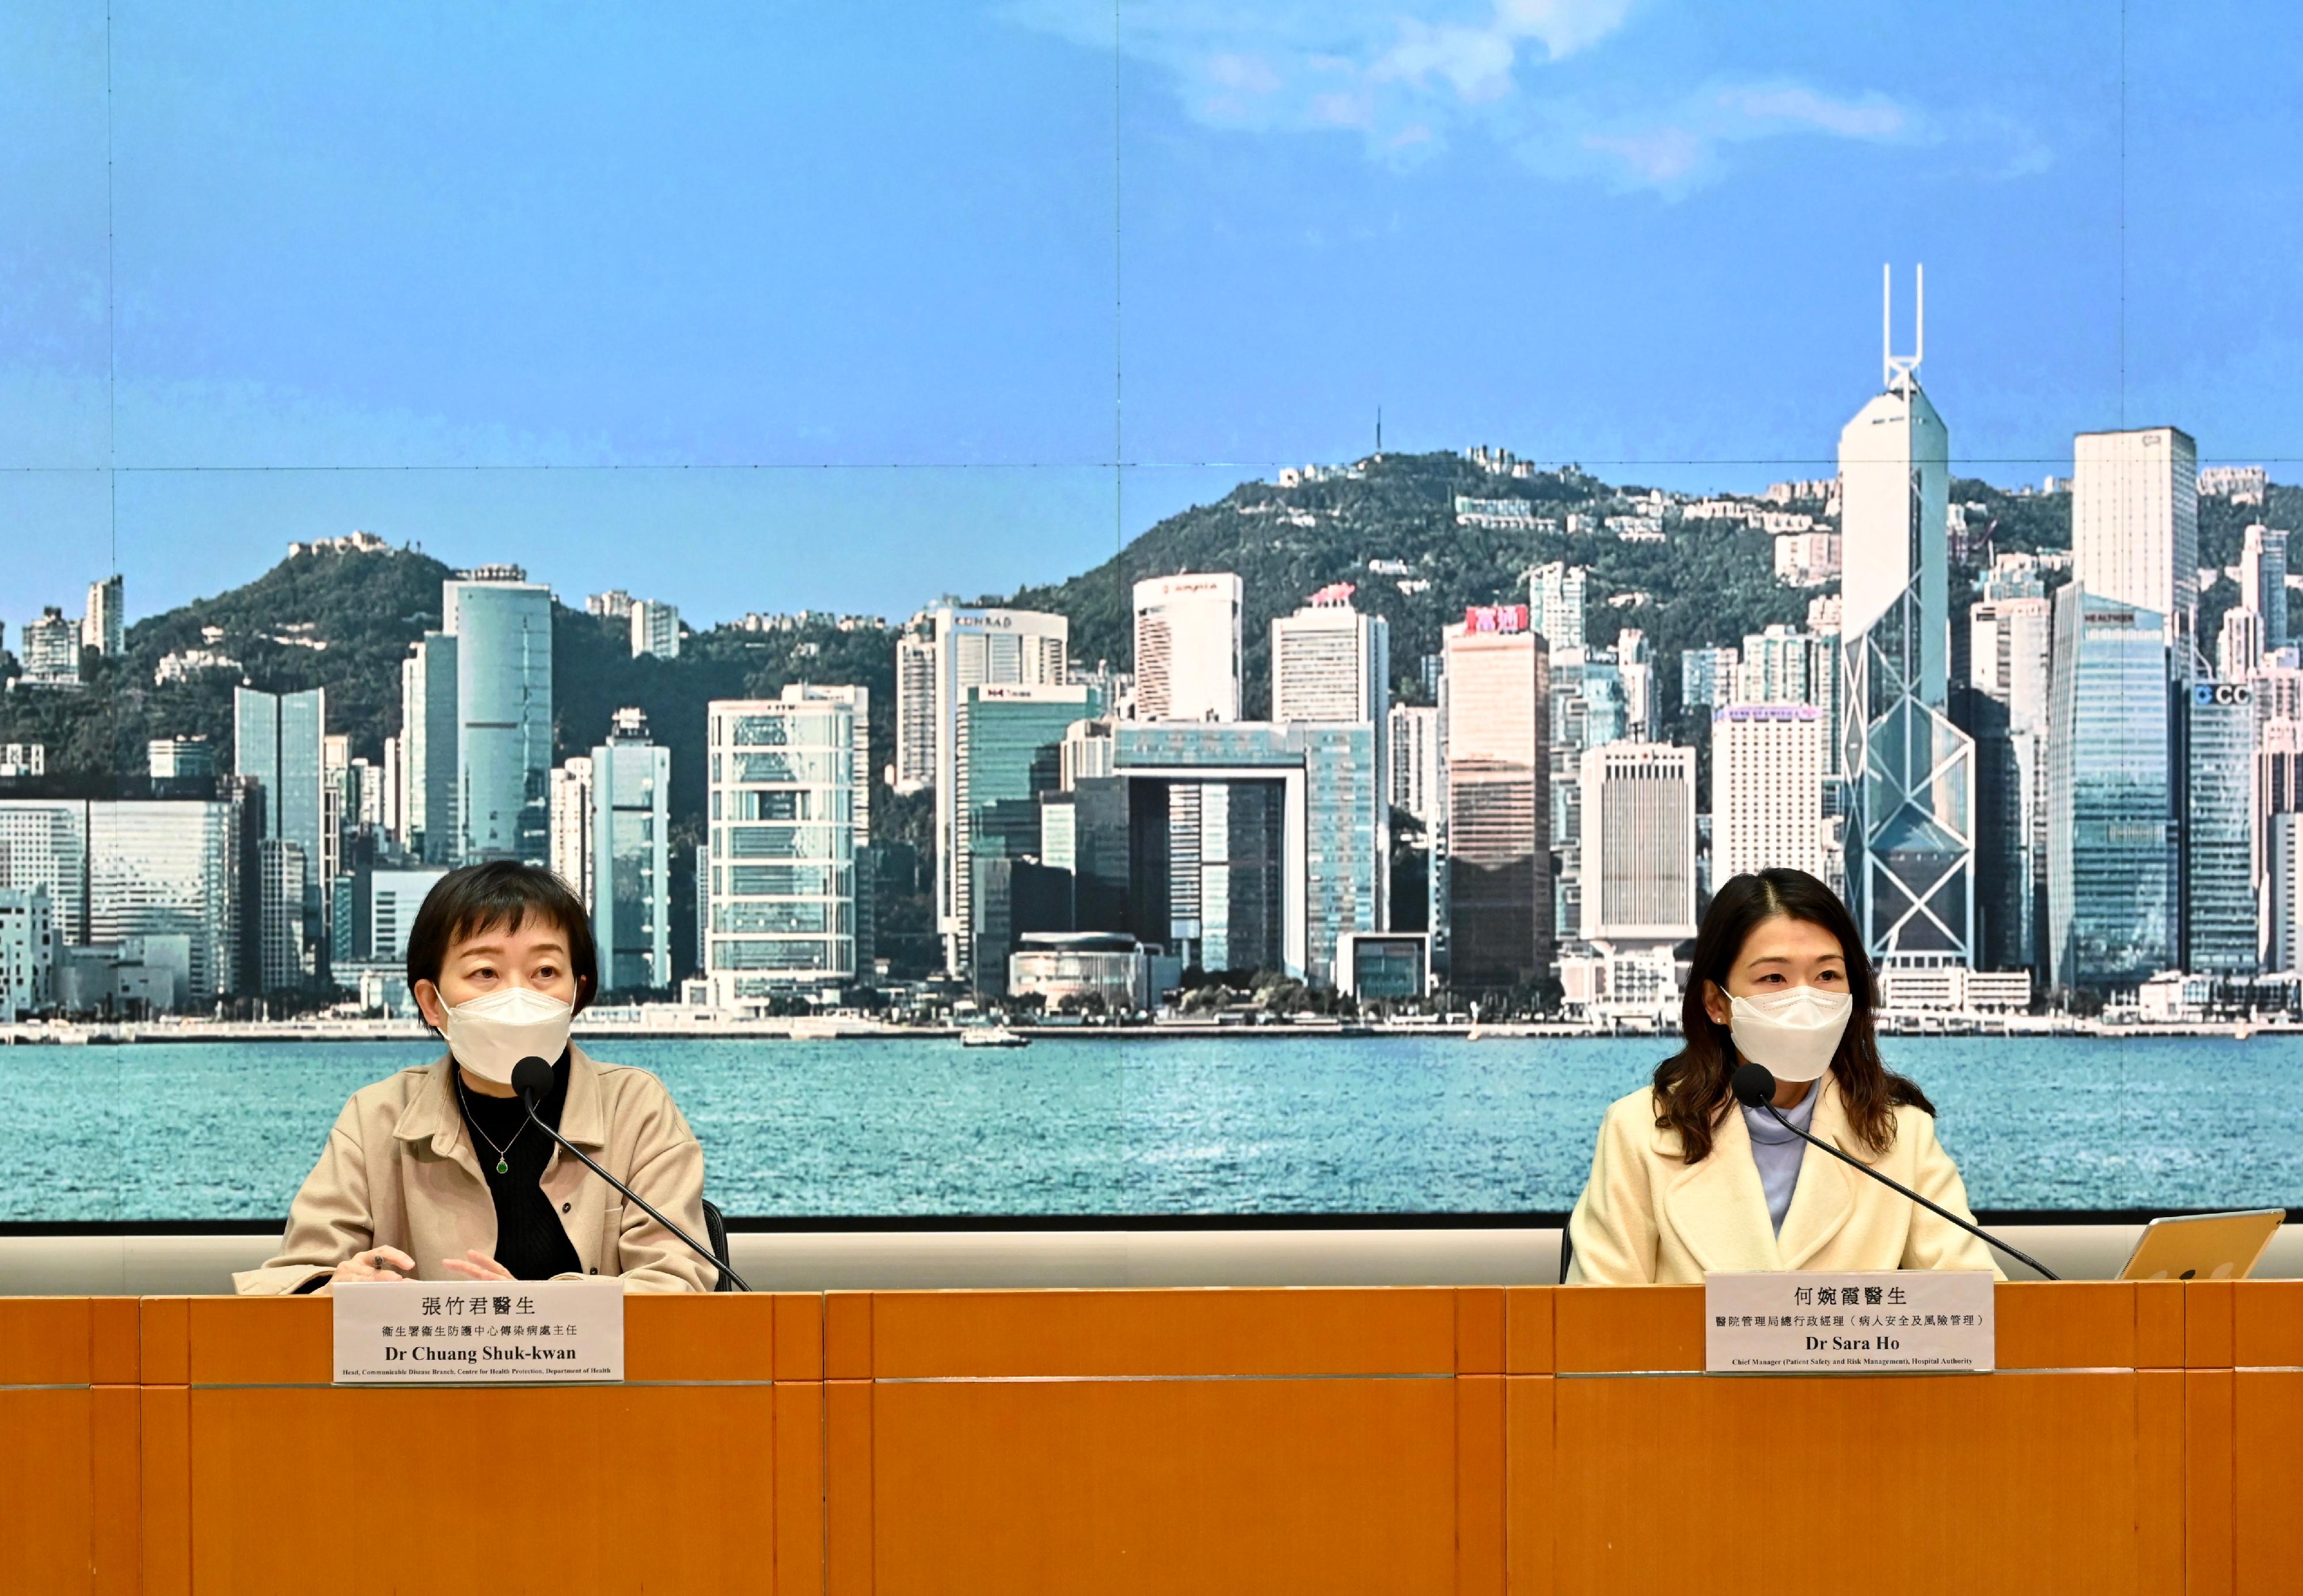 The Head of the Communicable Disease Branch of the Centre for Health Protection of the Department of Health, Dr Chuang Shuk-kwan (left), and the Chief Manager (Patient Safety and Risk Management) of the Hospital Authority, Dr Sara Ho, hold a press briefing on the latest situation of COVID-19 today (March 28).